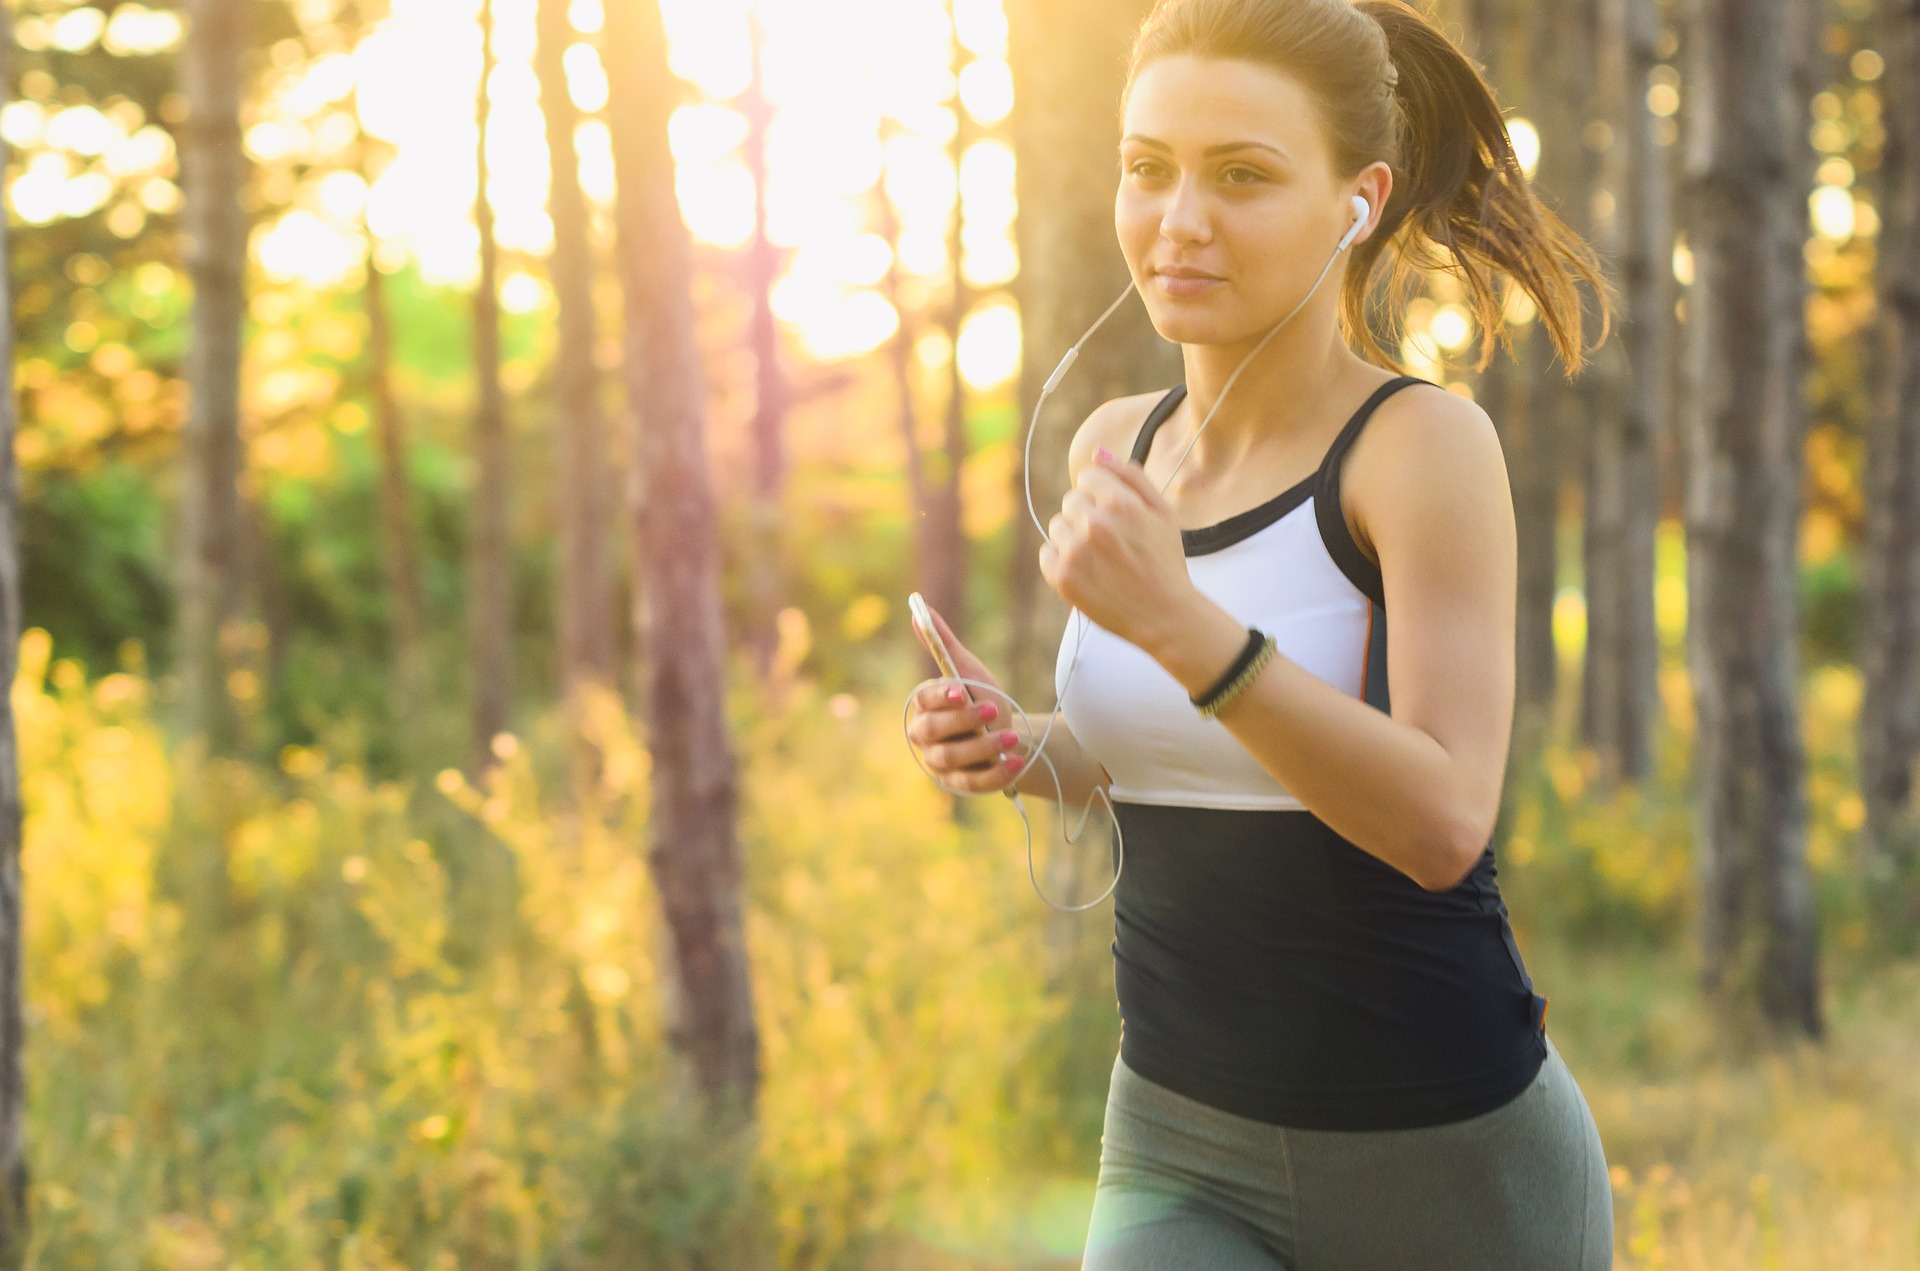 A woman jogging with headphones in